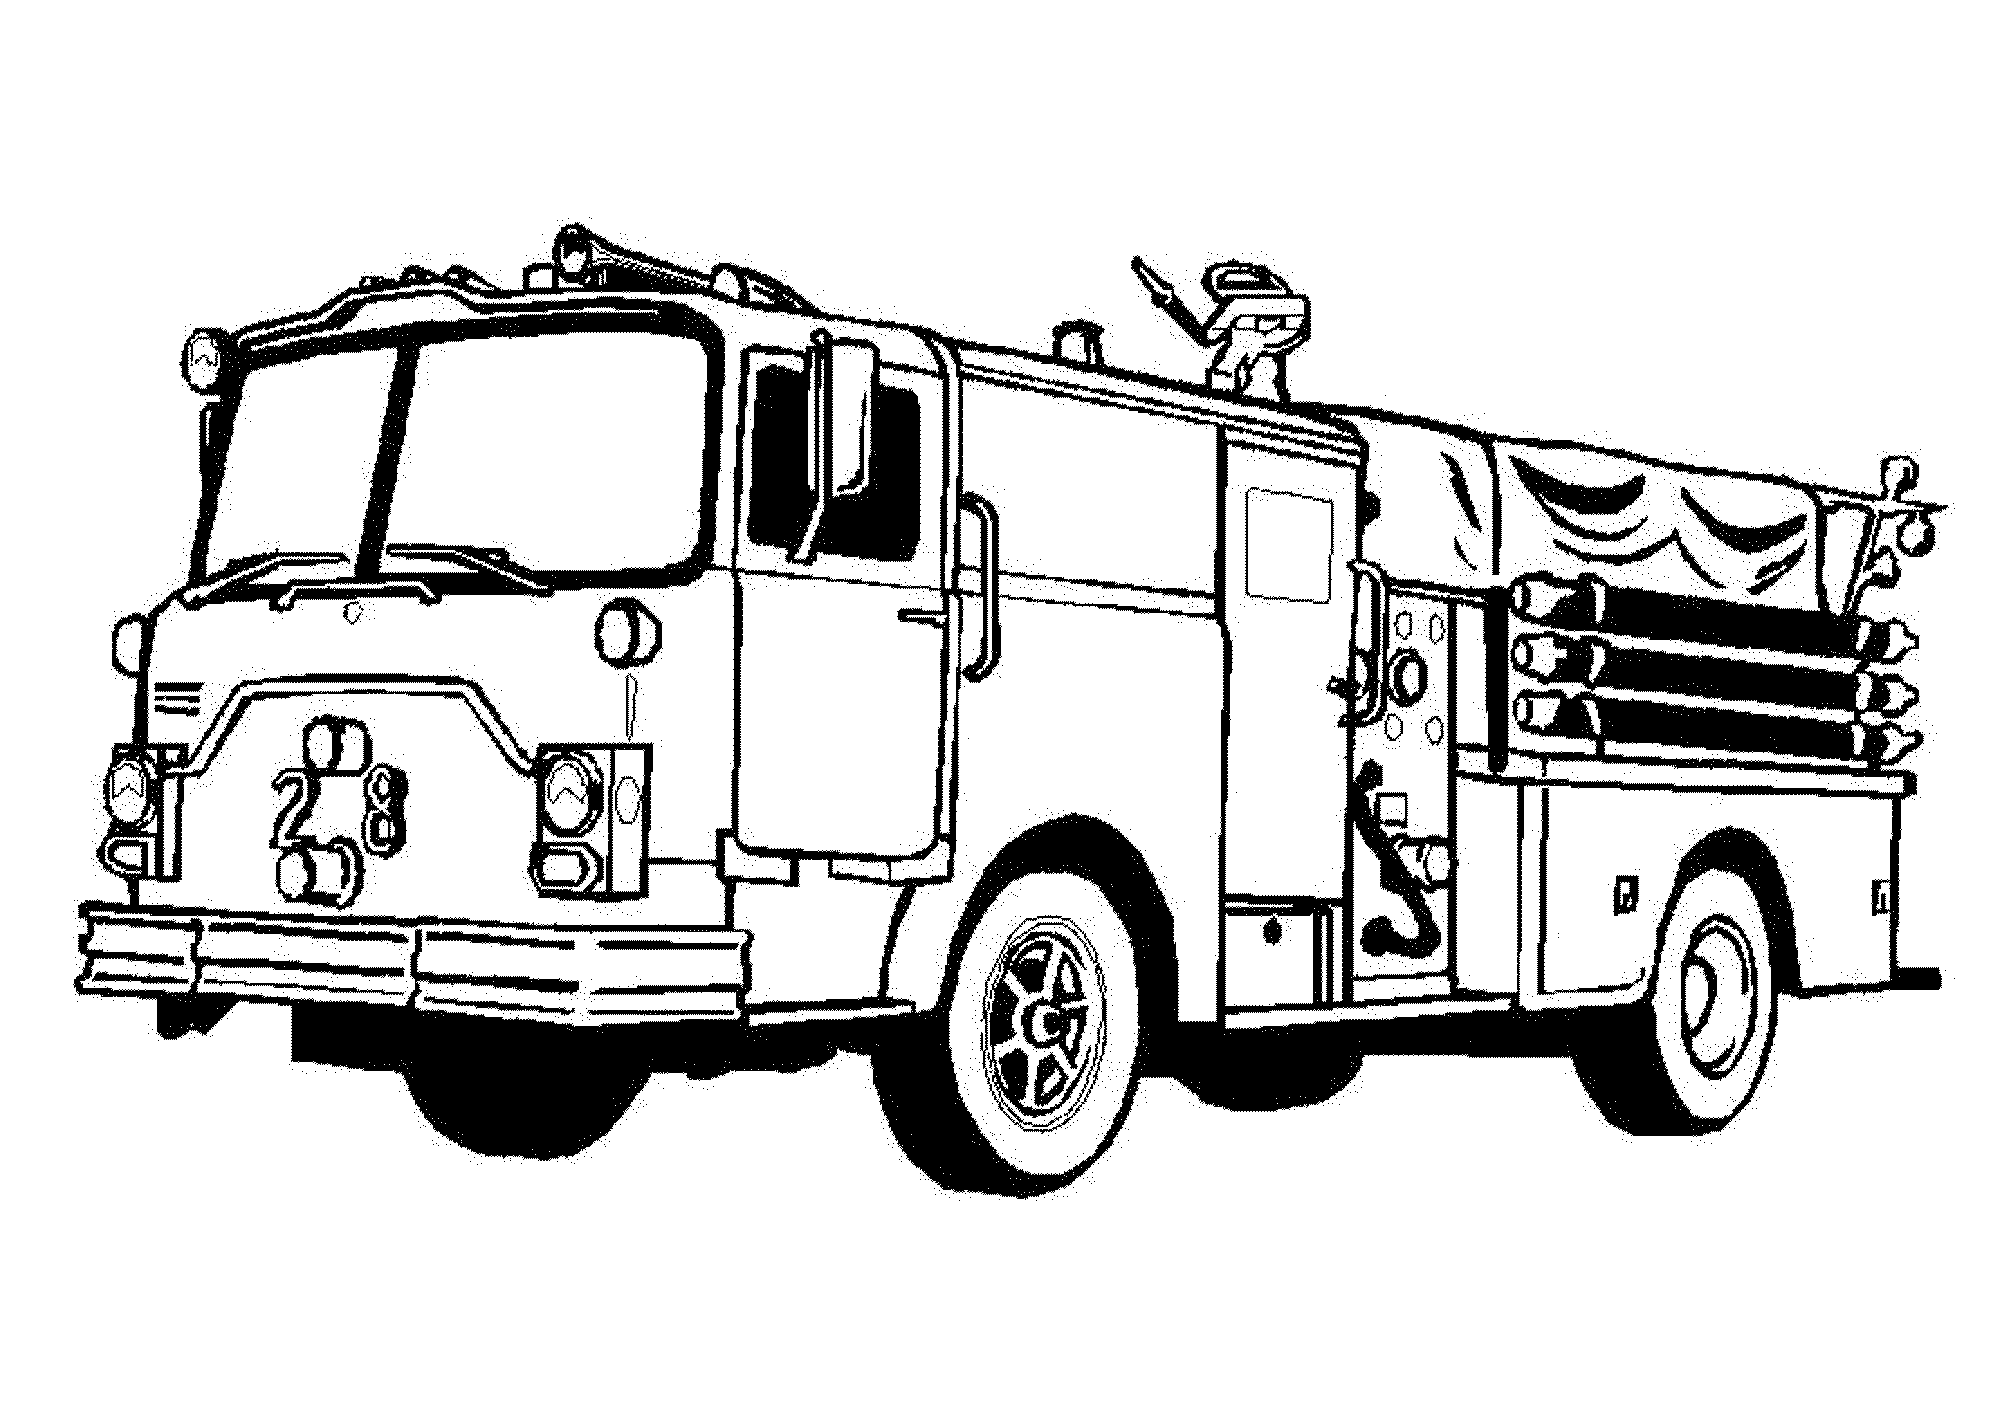 Download Print & Download - Educational Fire Truck Coloring Pages Giving Three in One Benefit